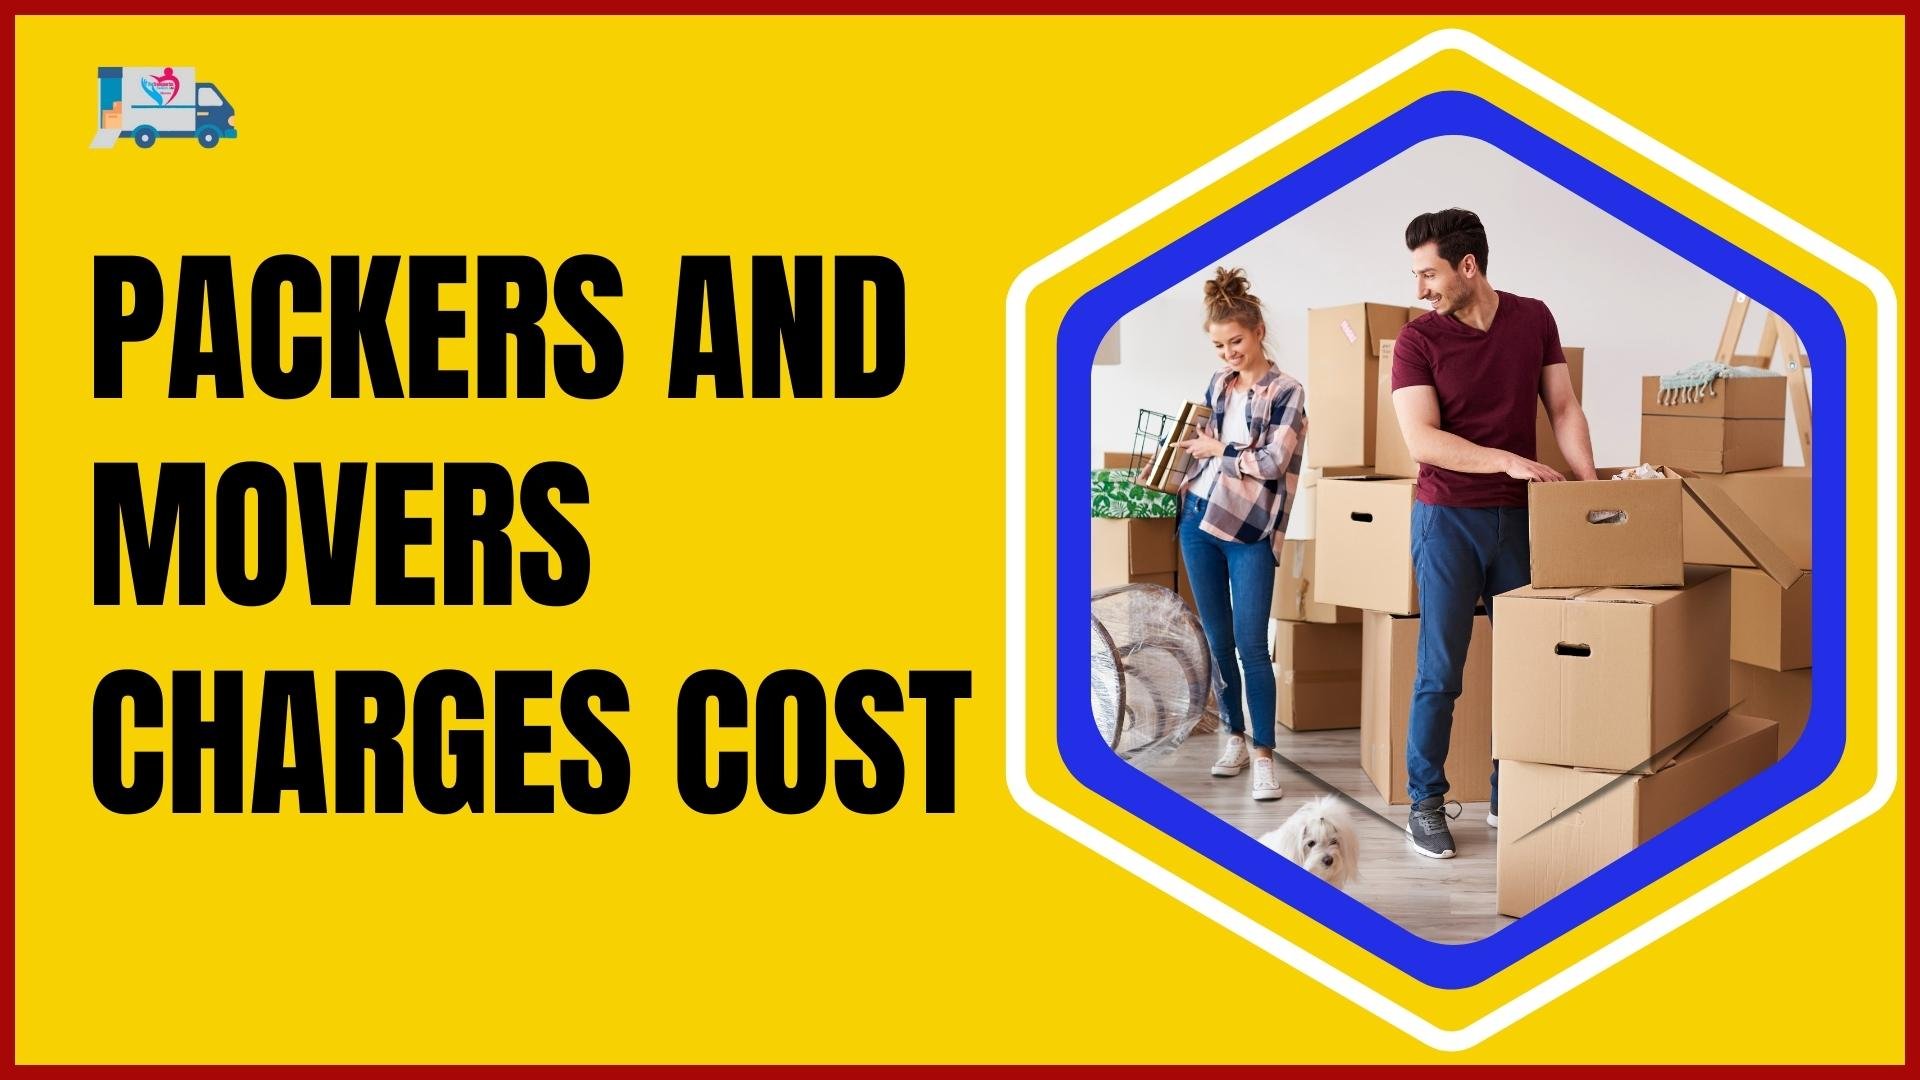 Packers and Movers offers competitive movers and packers Chennai rates and excellent services